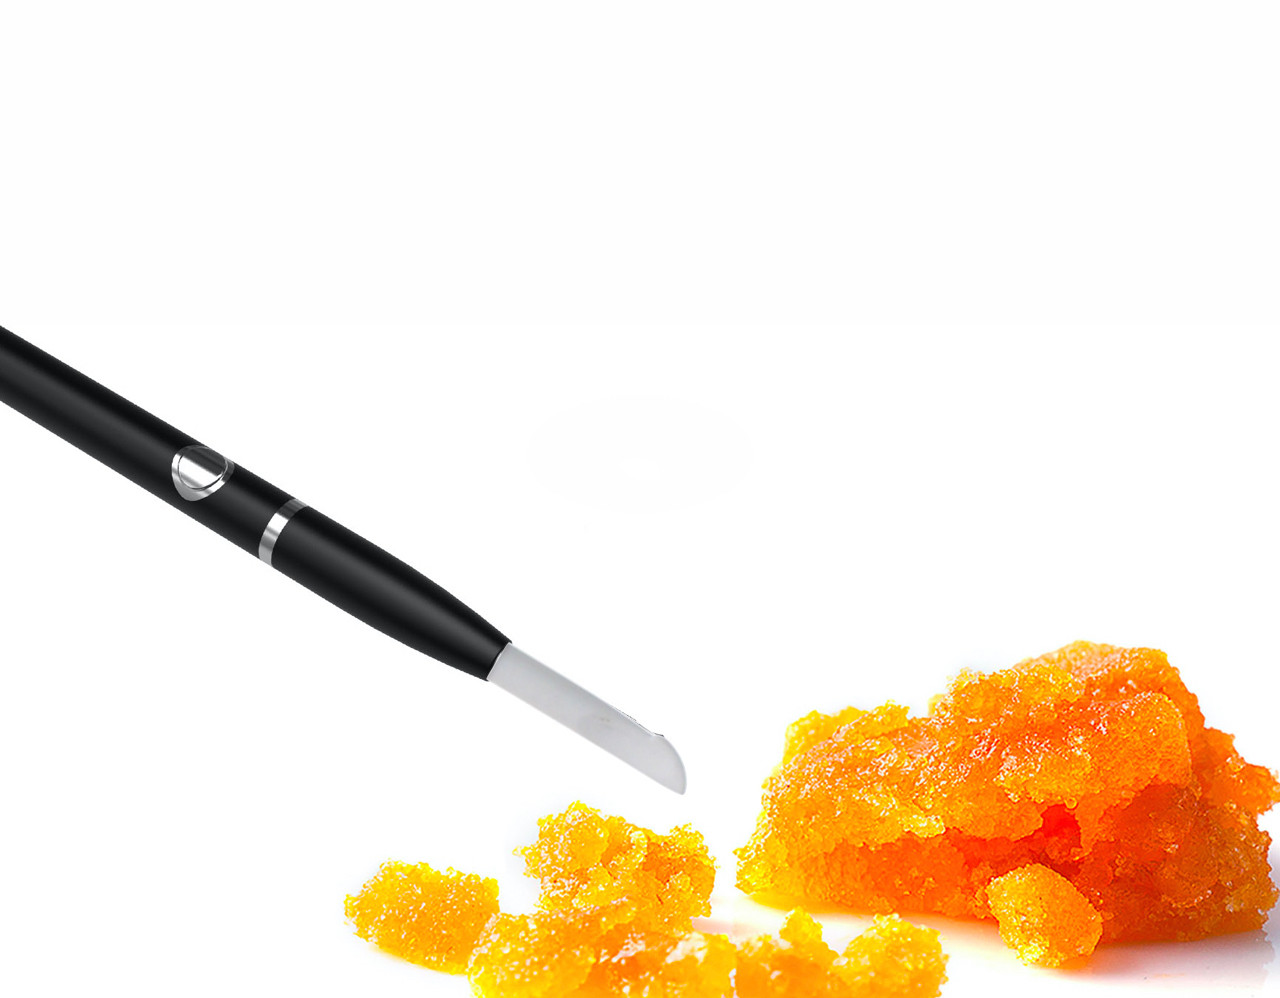 Puffco Hot Knife review: a dab tool for the ages